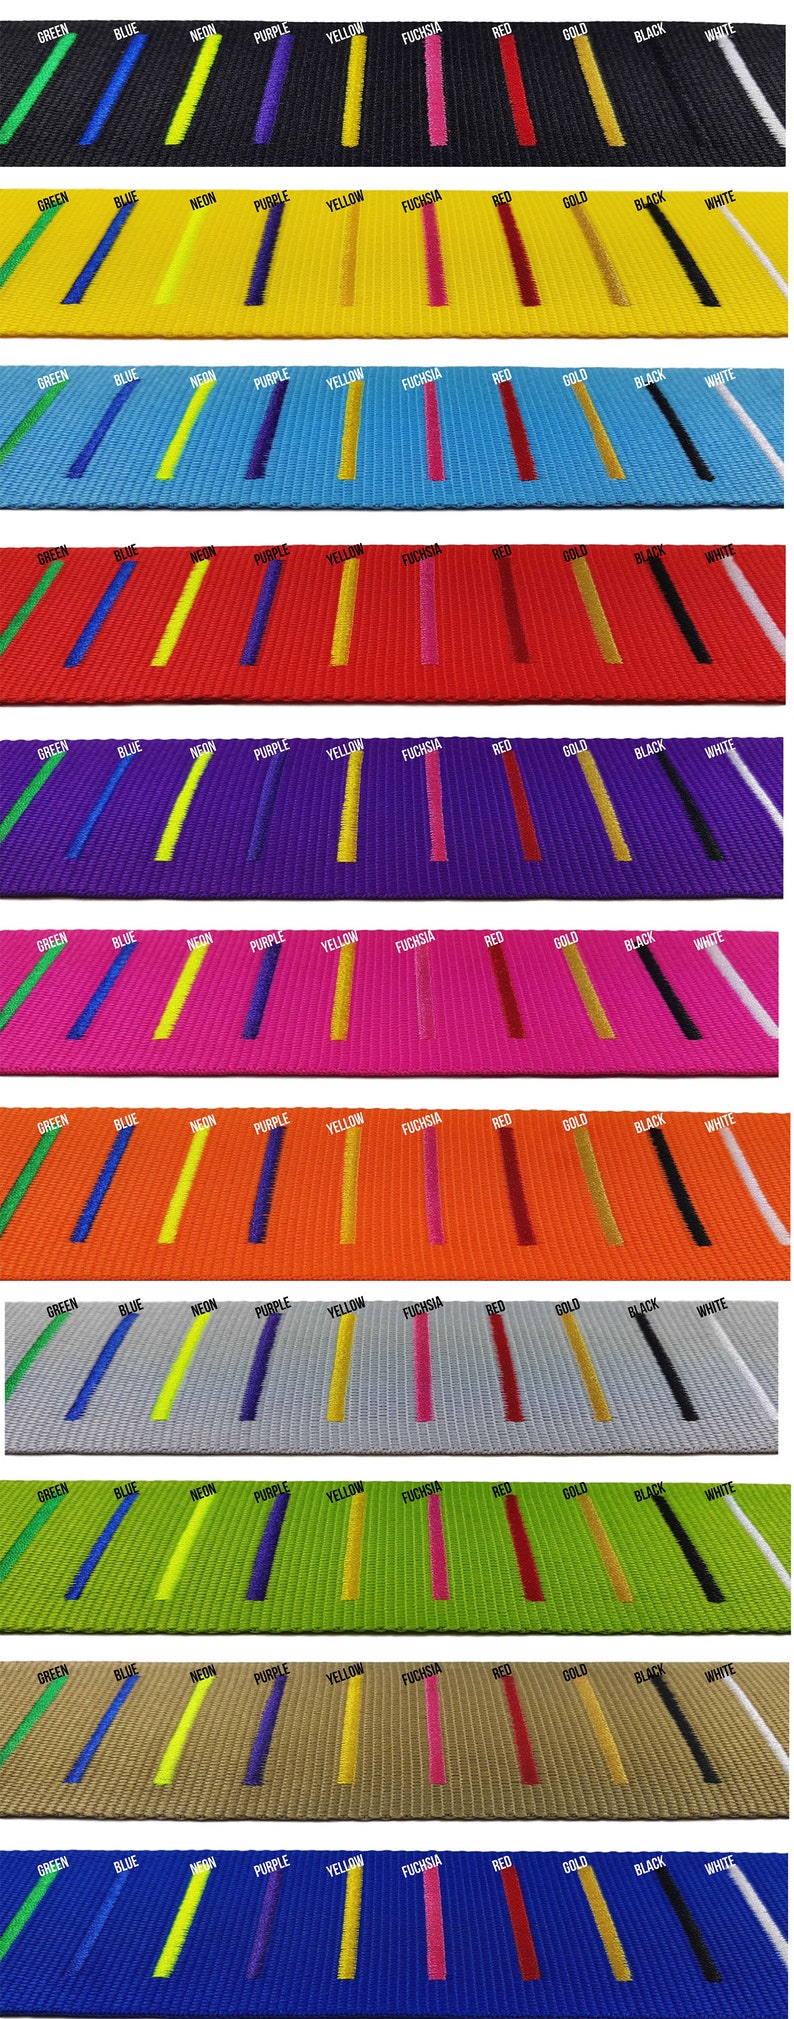 collection of luggage straps laid out in rows, each in a different vibrant colour with a variety of coloured embroidered stripes .  straps demonstrates the customization options available for personalized luggage identification.